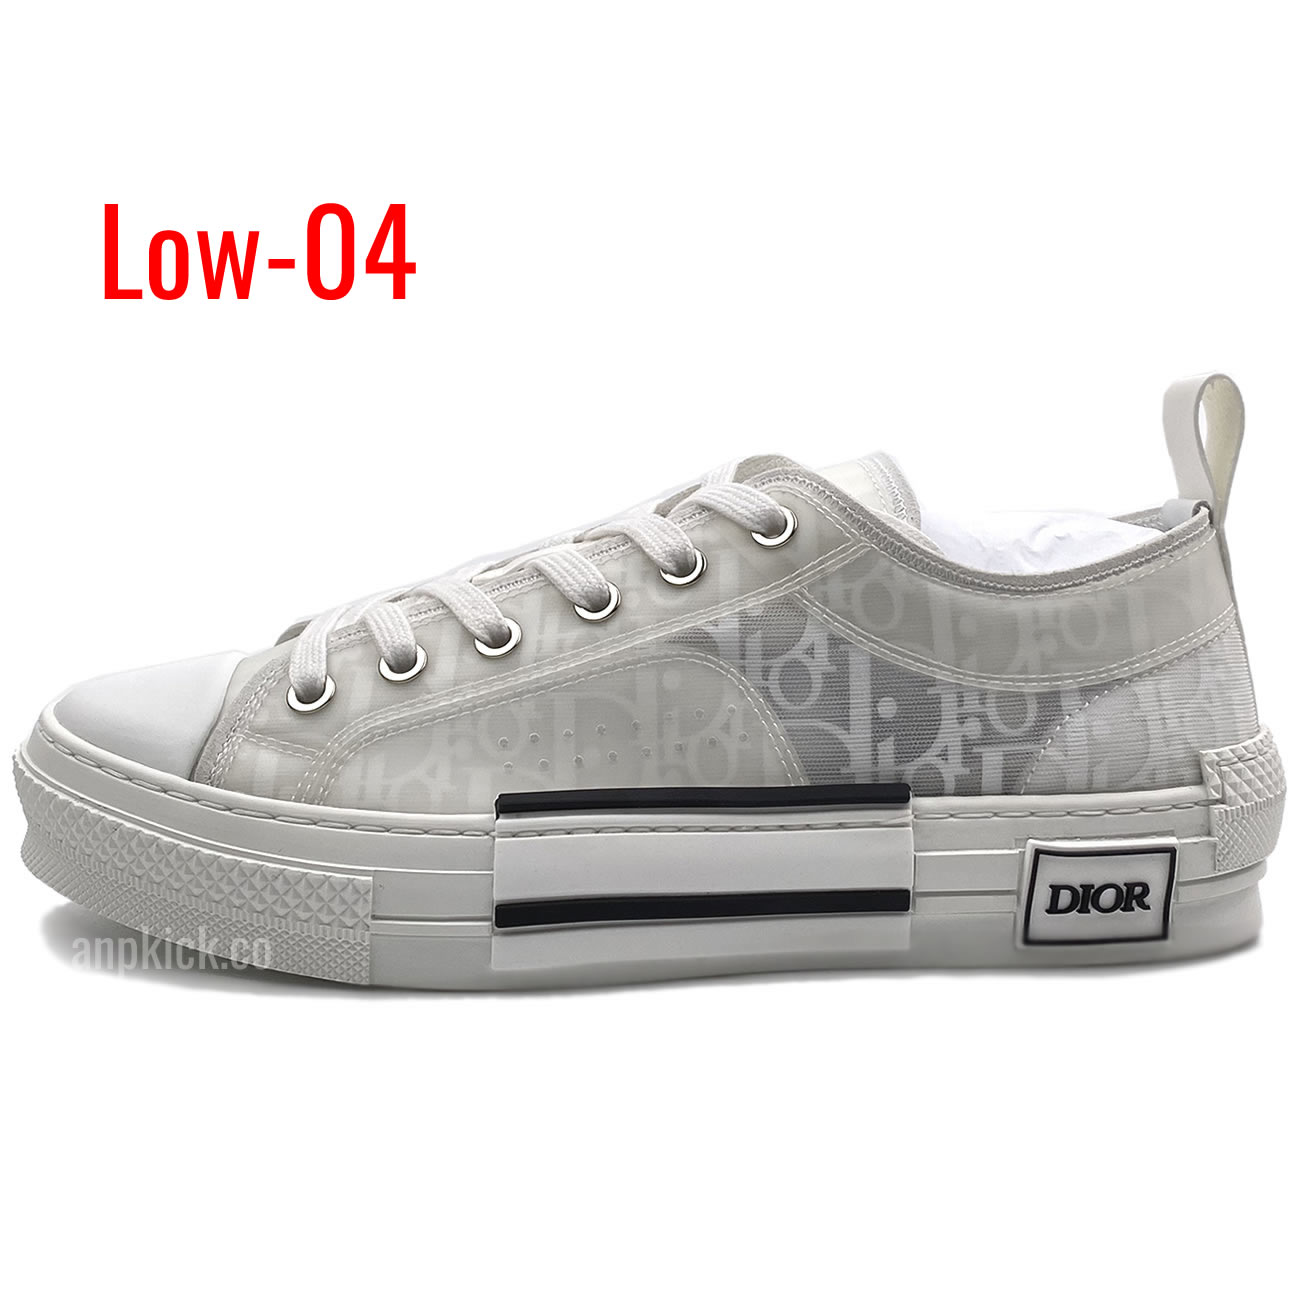 Dior B23 Low Shoes (4) - newkick.org